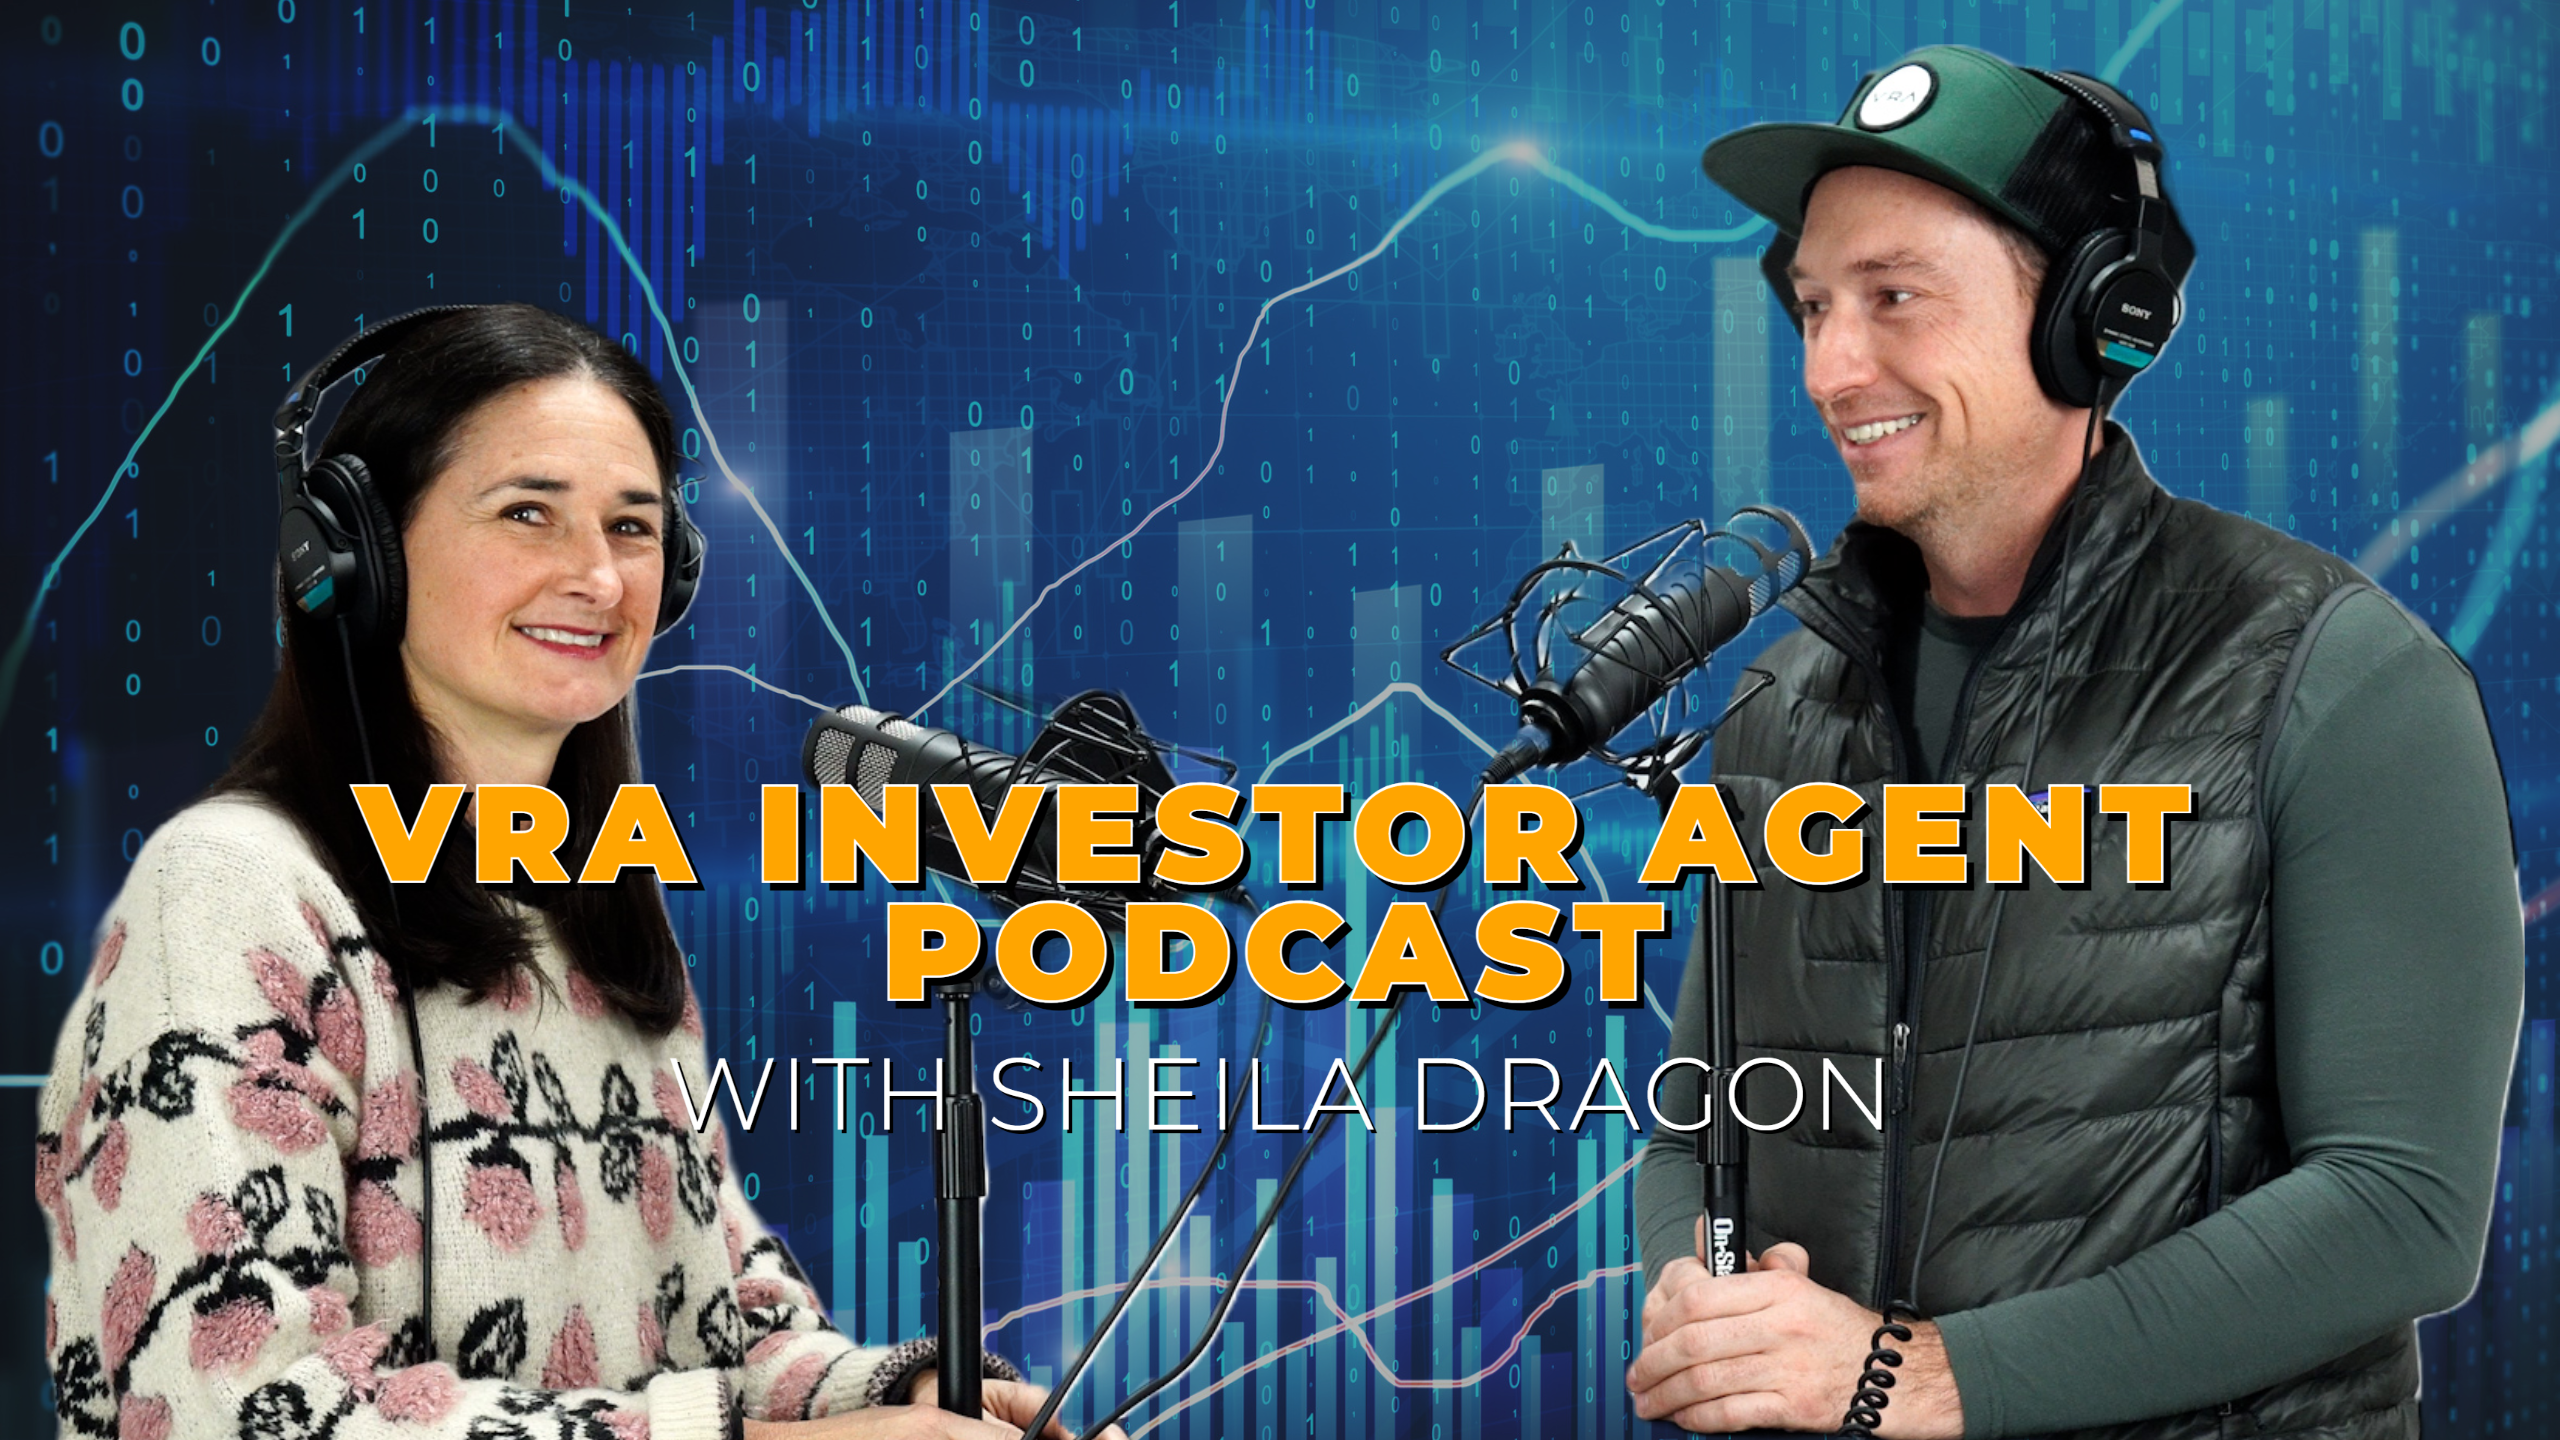 An Unconventional Look at Real Estate with Sheila Dragon!